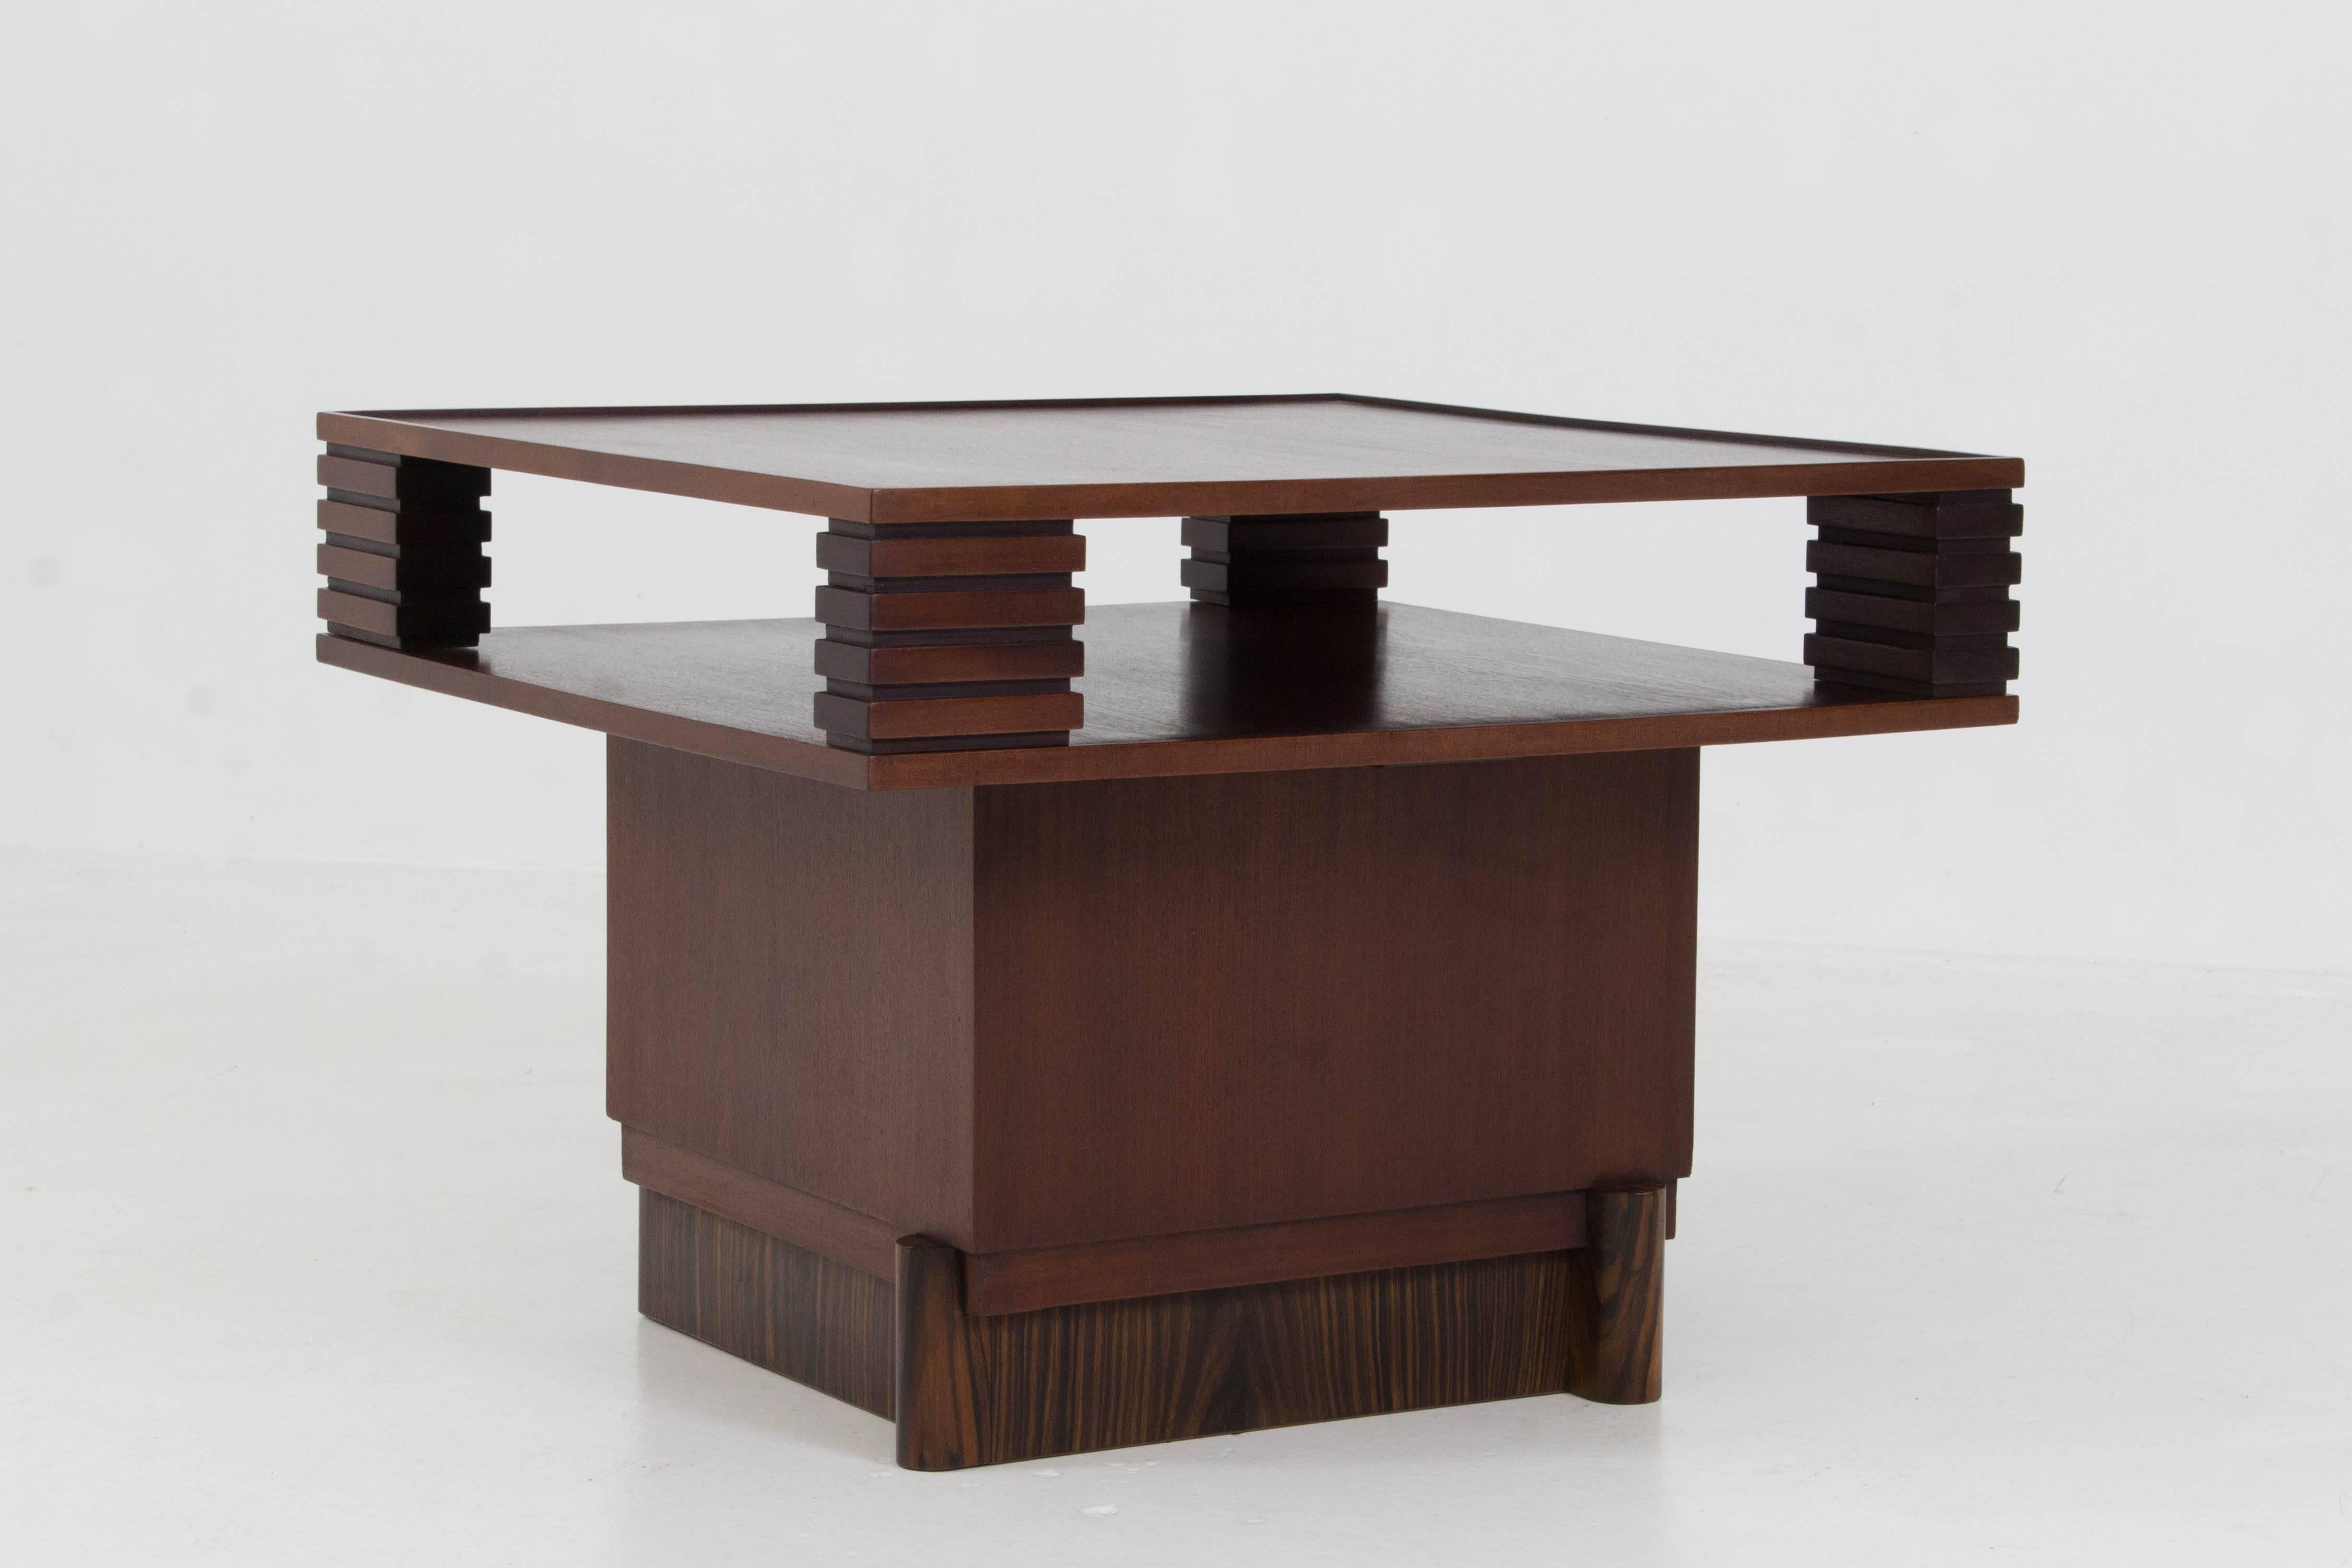 Stunning Art Deco Haagse School coffee table by J.Roodenburgh, 1920s.
Mahogany with Macassar ebony details.
Striking design from every angle.
In very good condition with minor wear consistent with age and use,
preserving a beautiful condition.